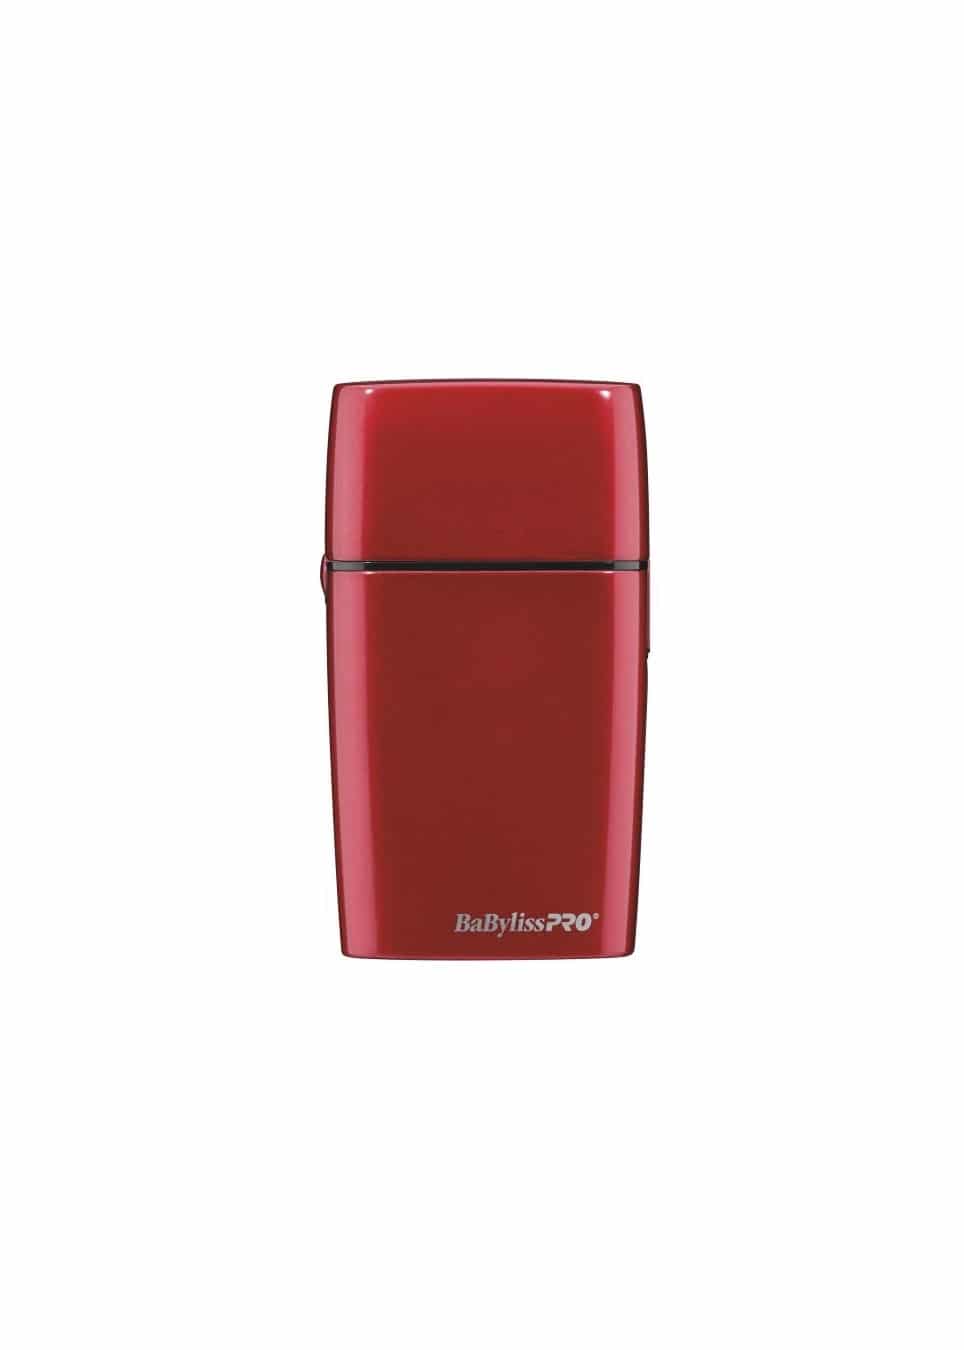 babyliss trimmer red